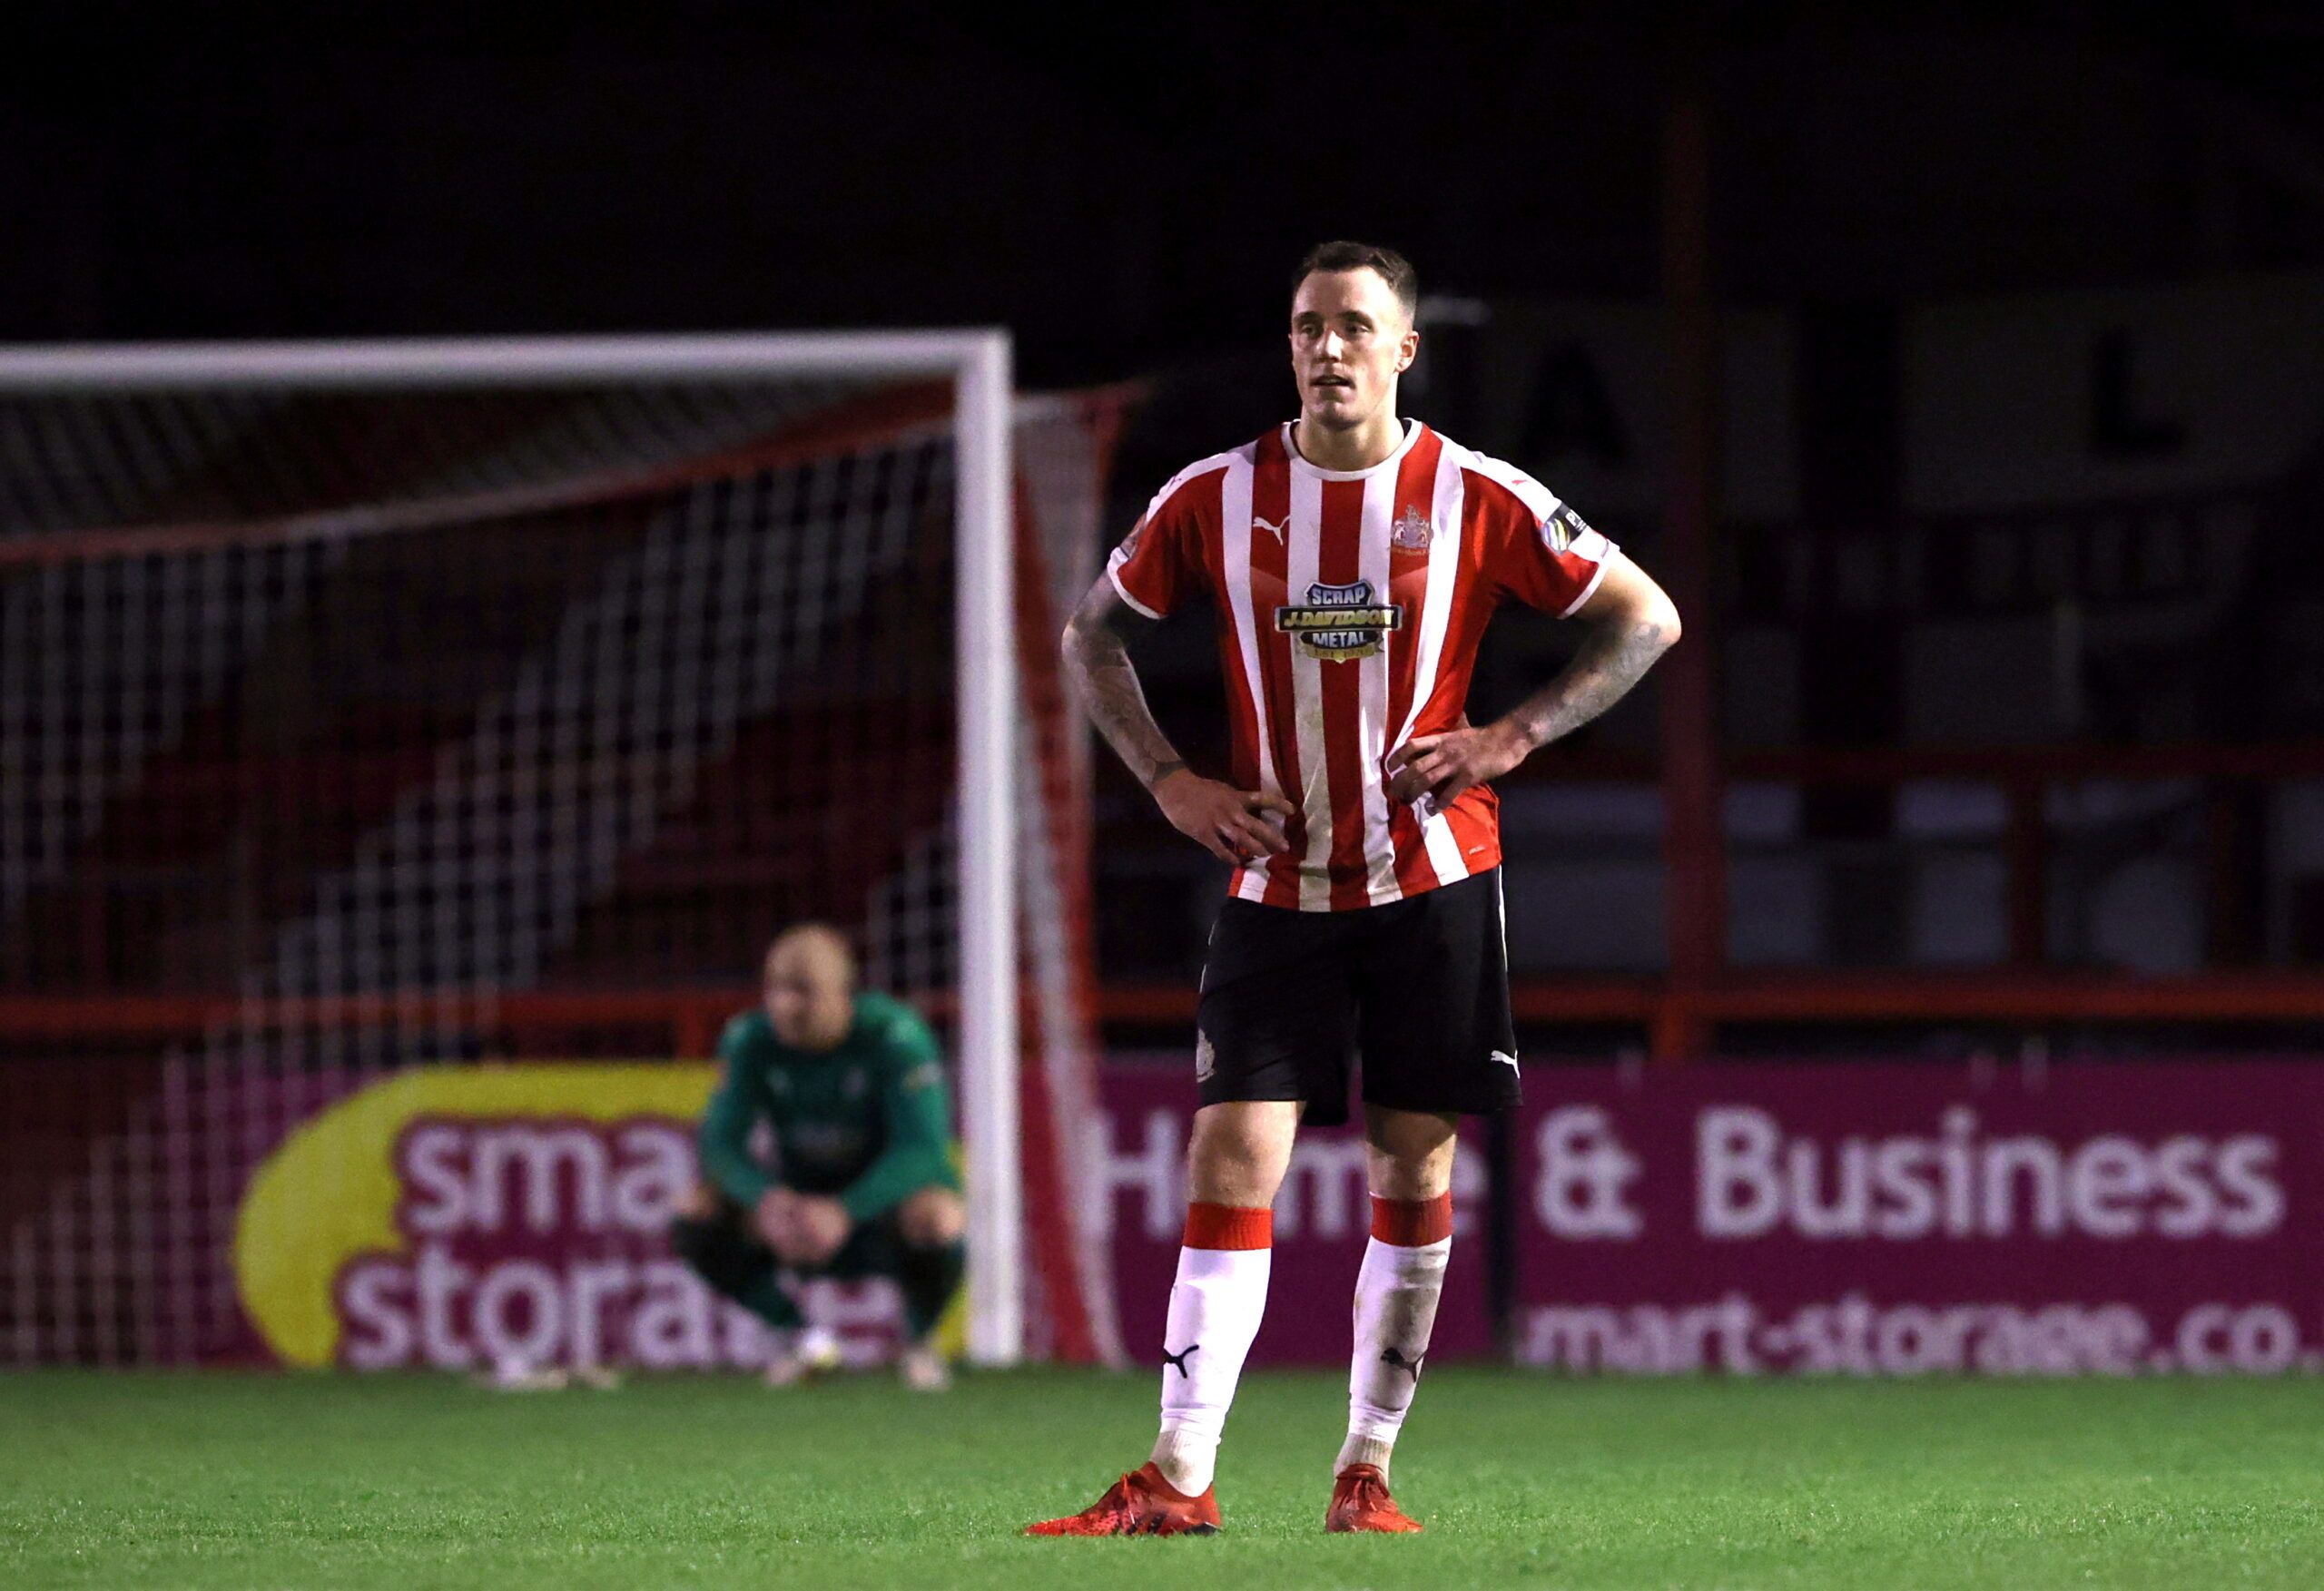 Soccer Football - FA Cup - FA Cup First Round Replay - Altrincham v Gateshead - Moss Lane, Altrincham, Britain - November 16, 2021 Altrincham's Toby Mullarkey reacts after the match Action Images/Molly Darlington